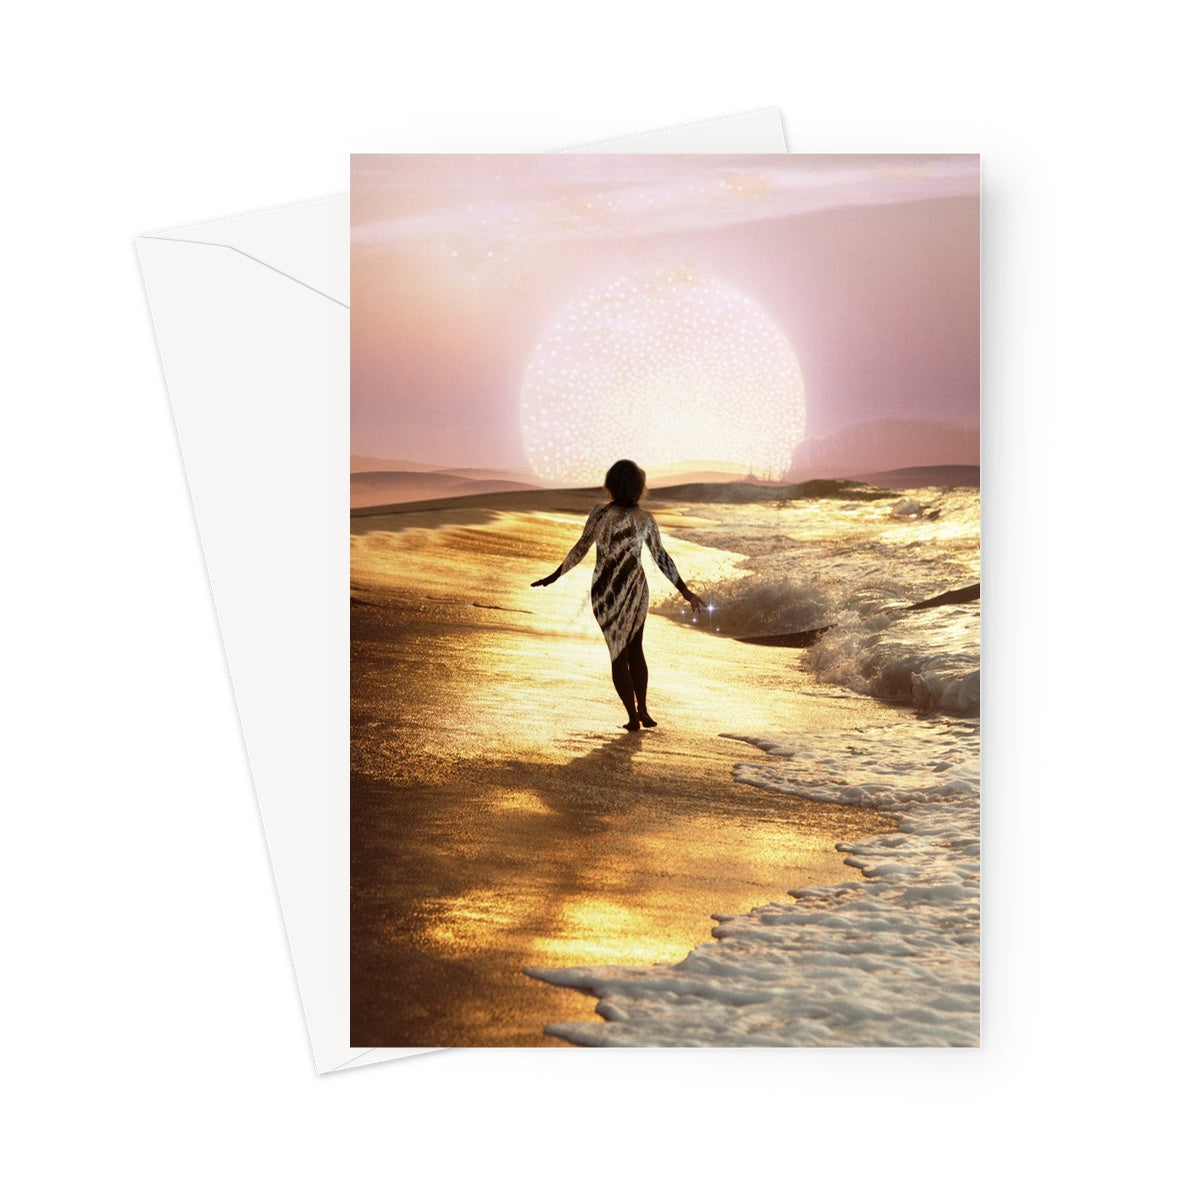 Total Bliss Greeting Card - Starseed Designs Inc.